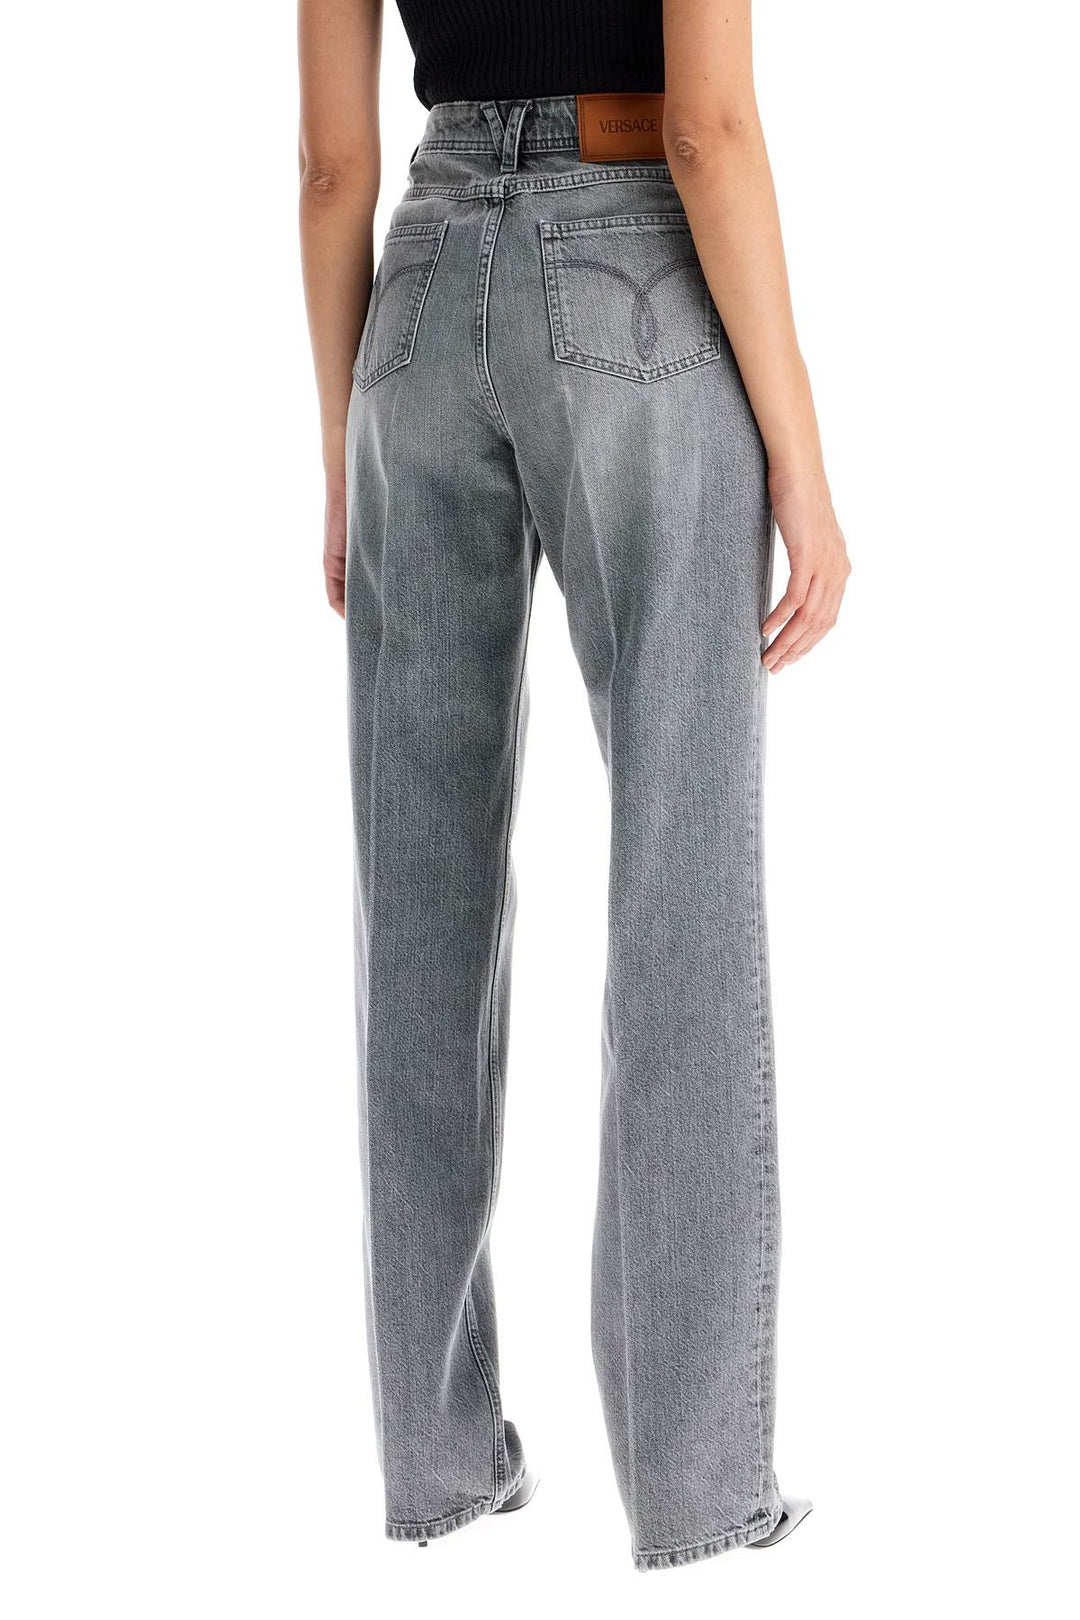 Versace Straight Jeans With Medusa Details   Grey